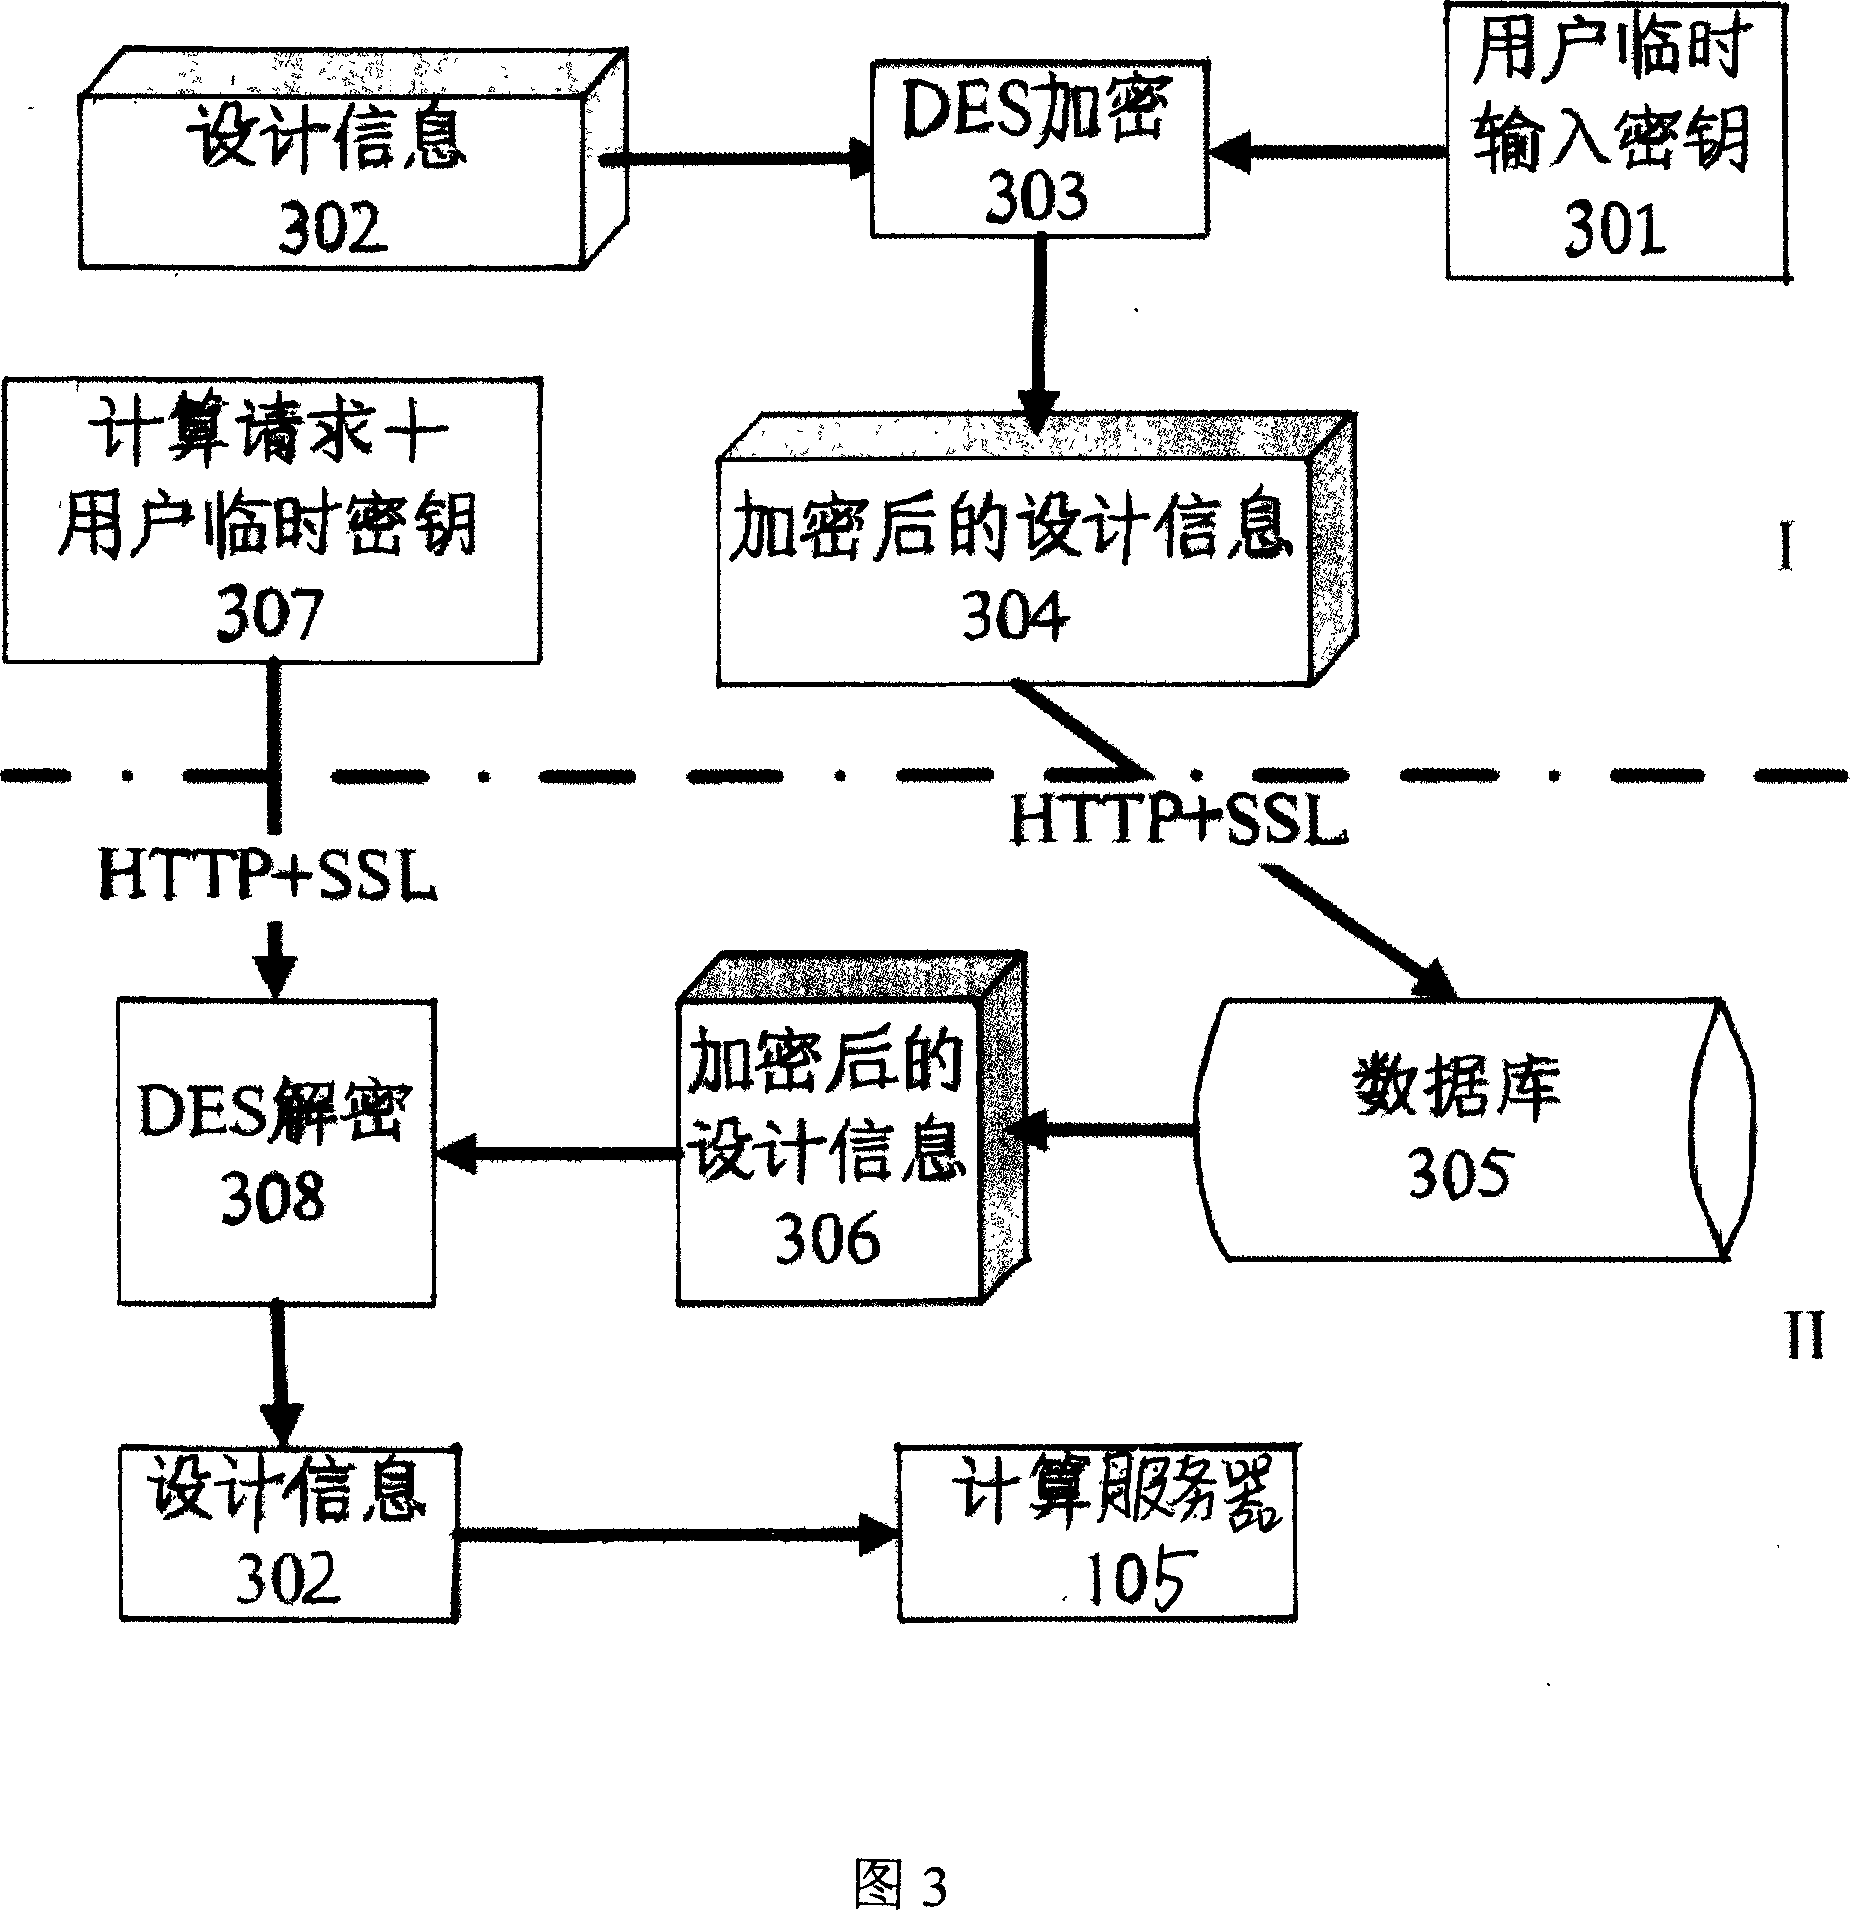 Structure of network simulation service